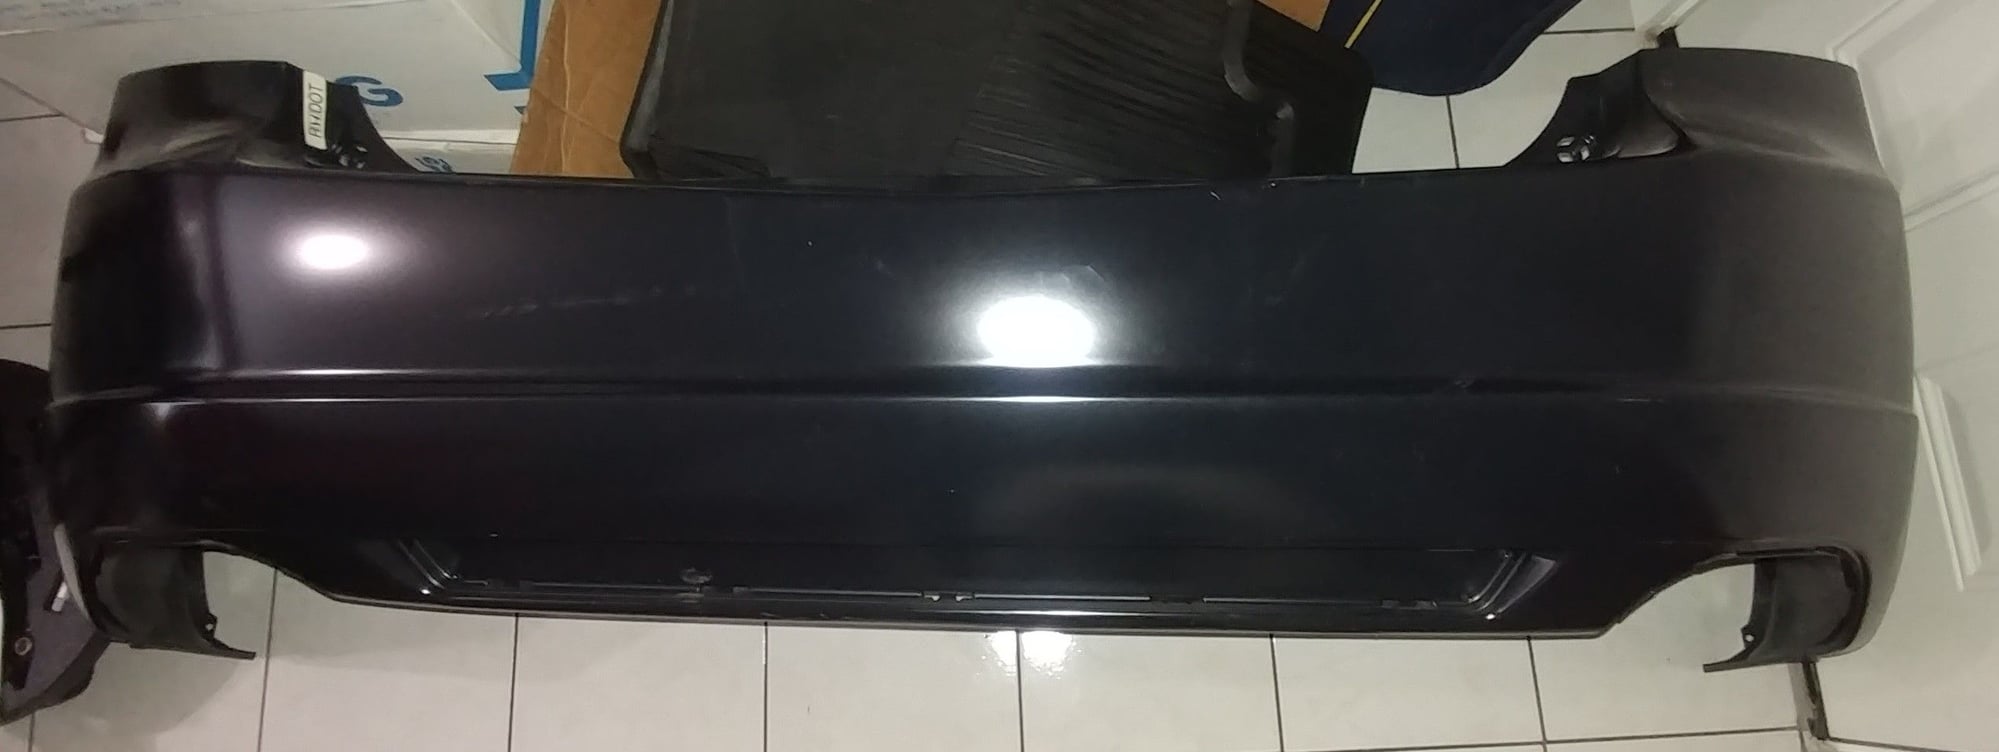 2008 Acura TL - OEM Type S rear bumper ONLY (non-painted) - Exterior Body Parts - $233 - Houston, TX 77584, United States